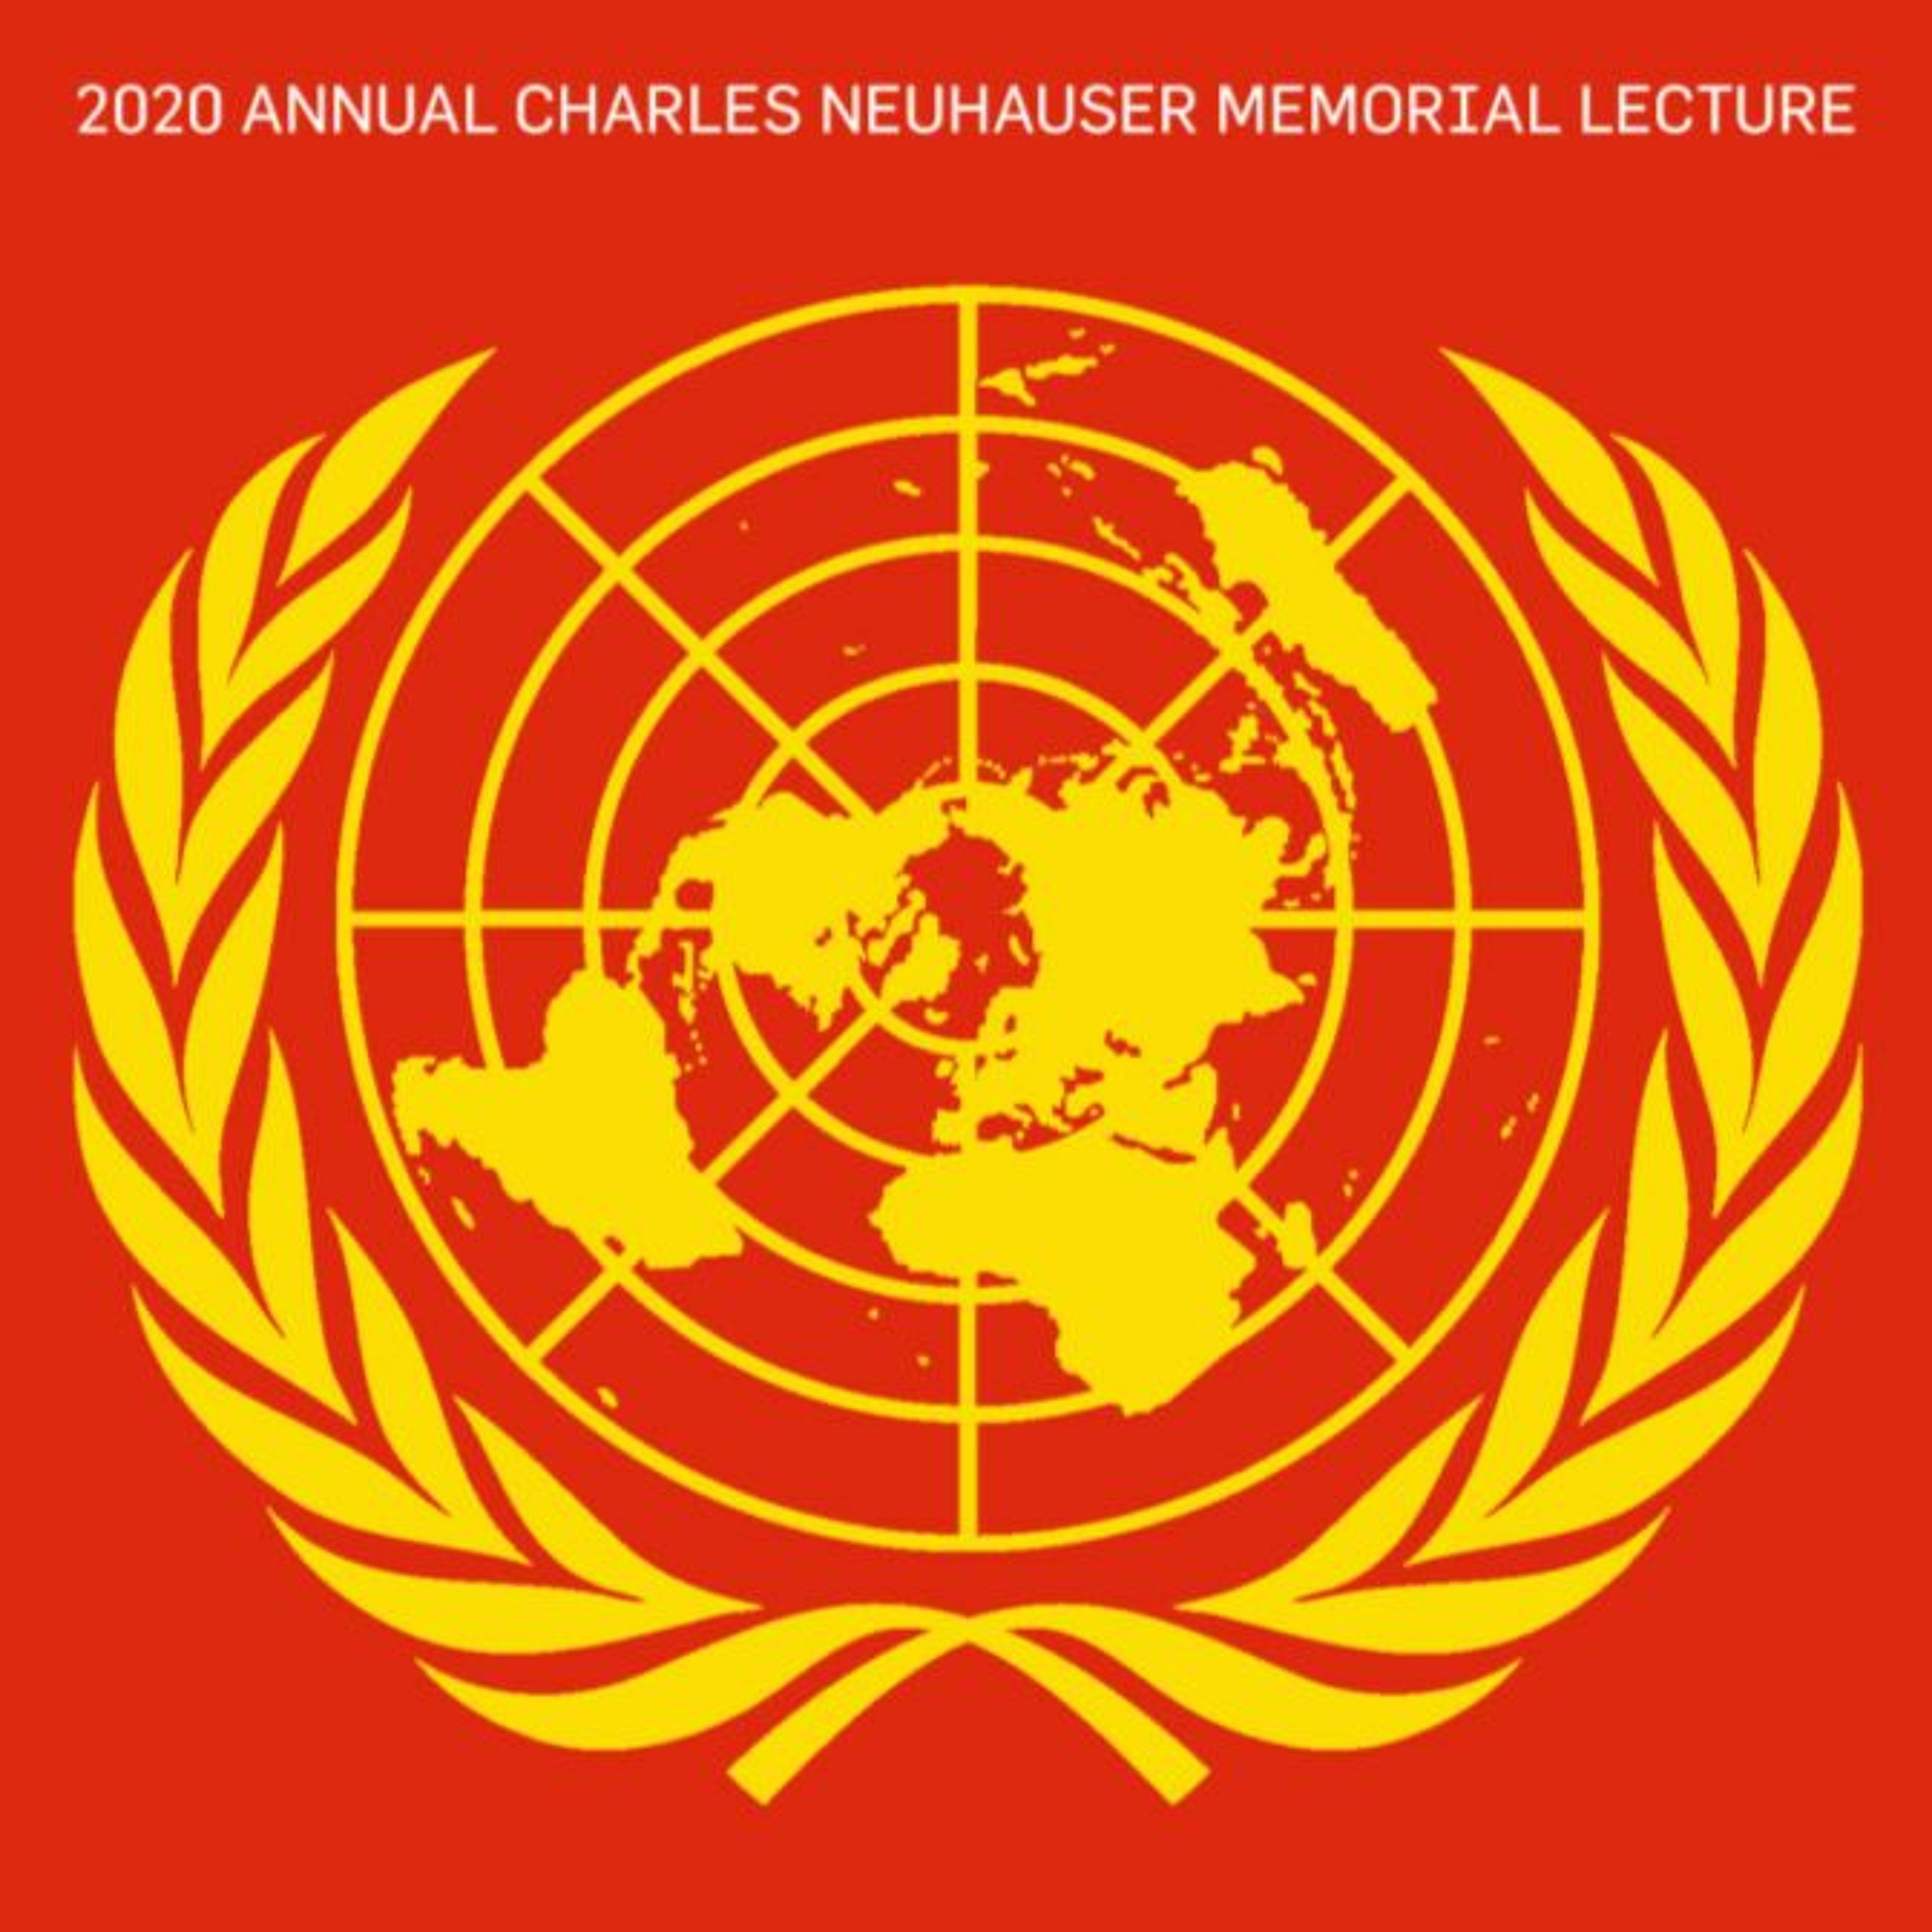 Samantha Power - China, the UN, and the Future of Human Rights | 2020 Neuhauser Memorial Lecture